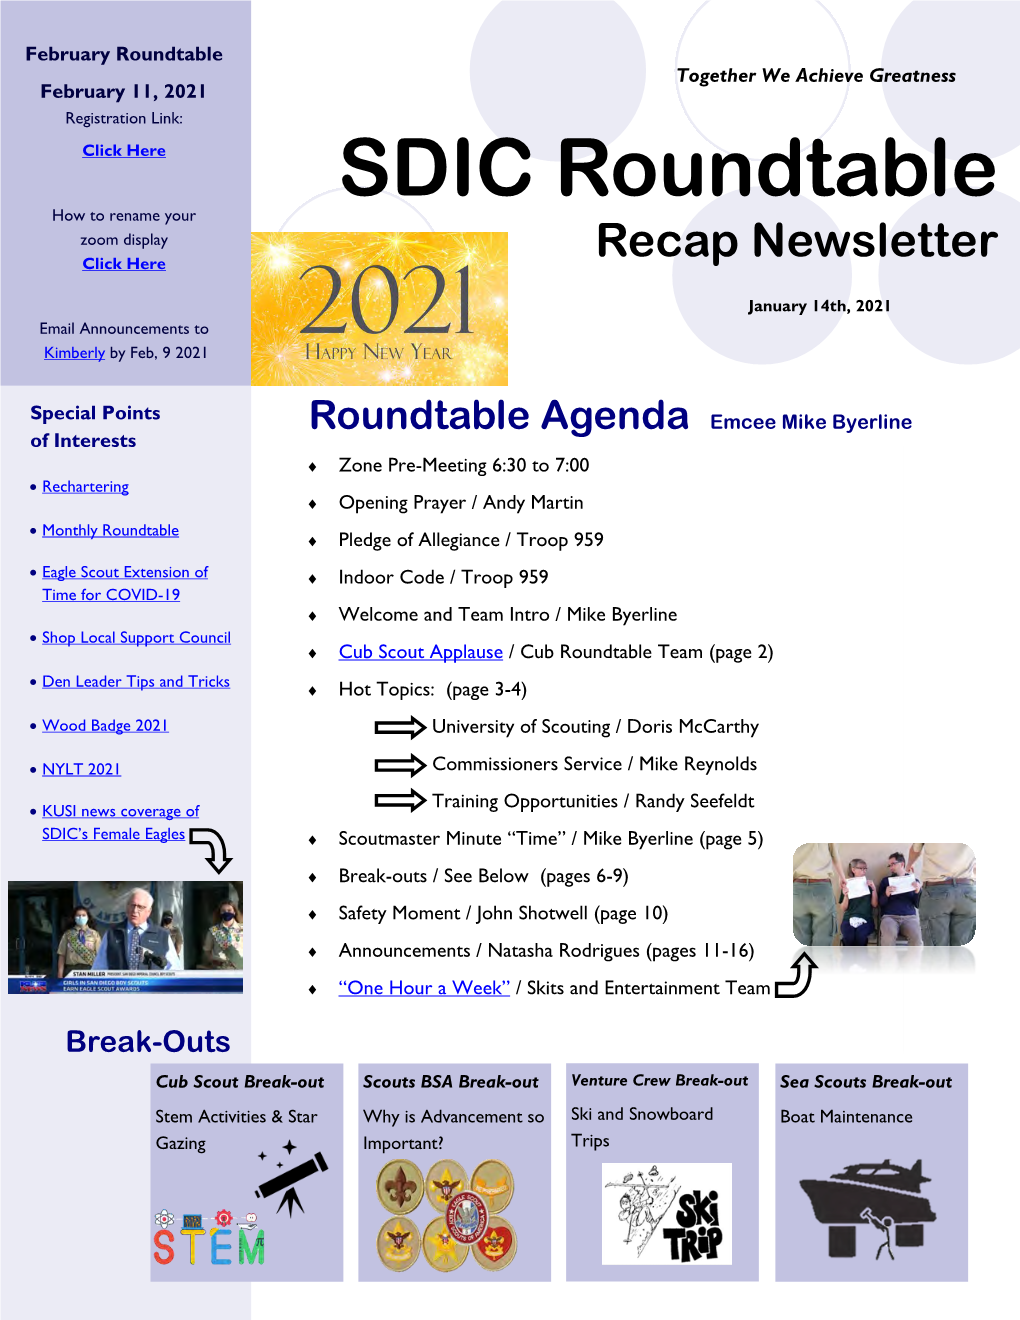 SDIC Roundtable How to Rename Your Zoom Display Recap Newsletter Click Here